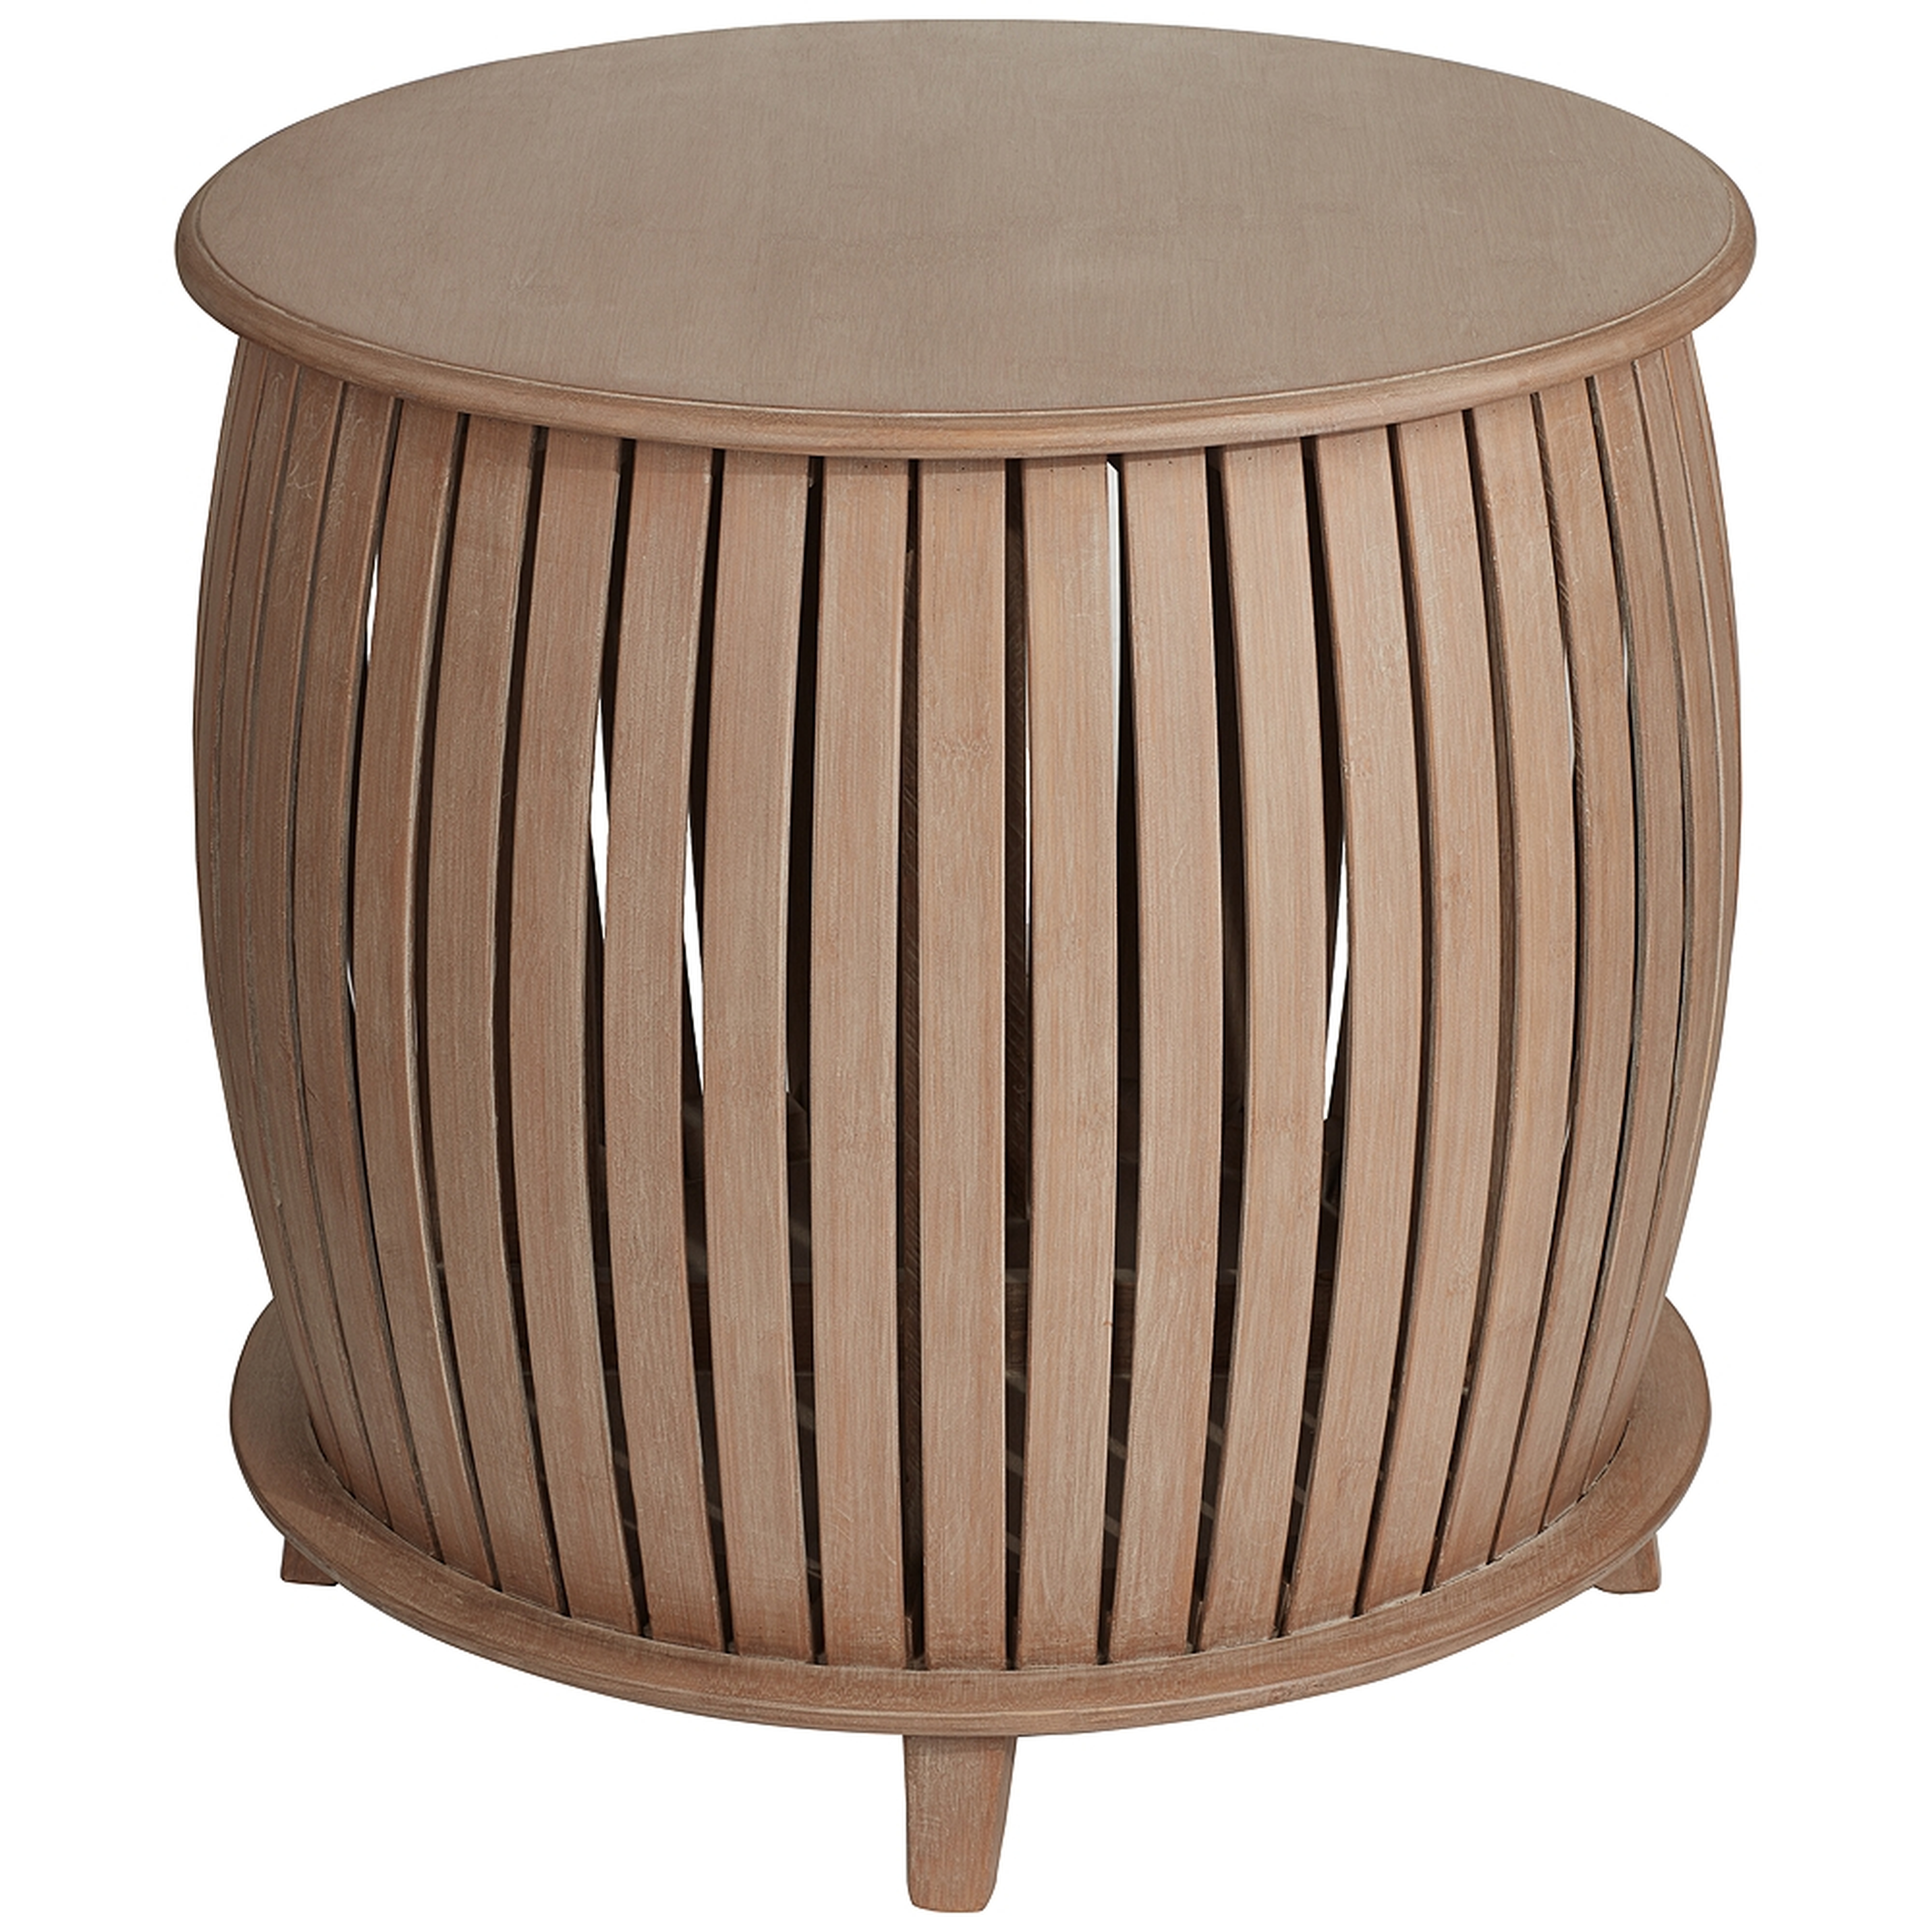 Artino Distressed Natural Bamboo Accent Table - Style # 79F11 - Lamps Plus